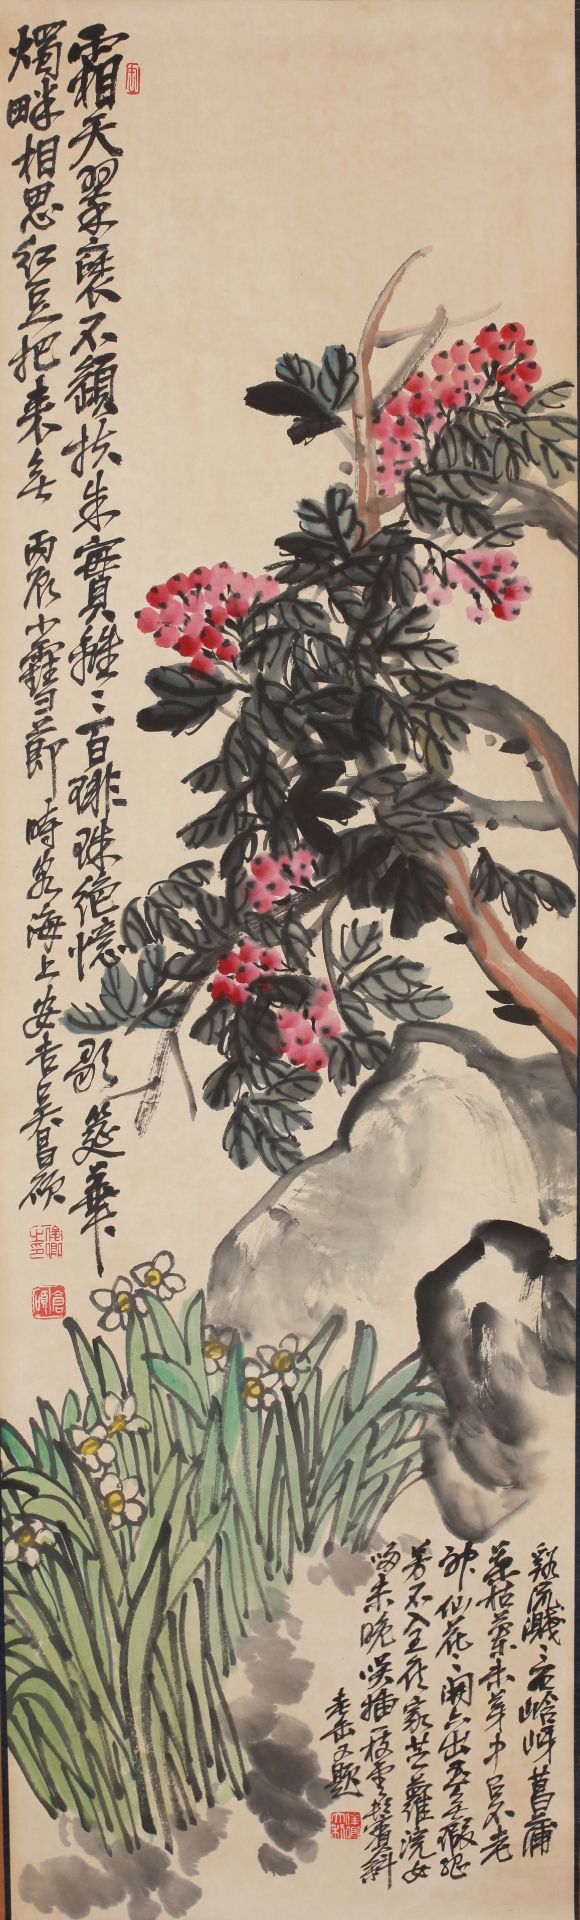 A Chinese Scroll Painting By Wu Changshuo - Image 4 of 10